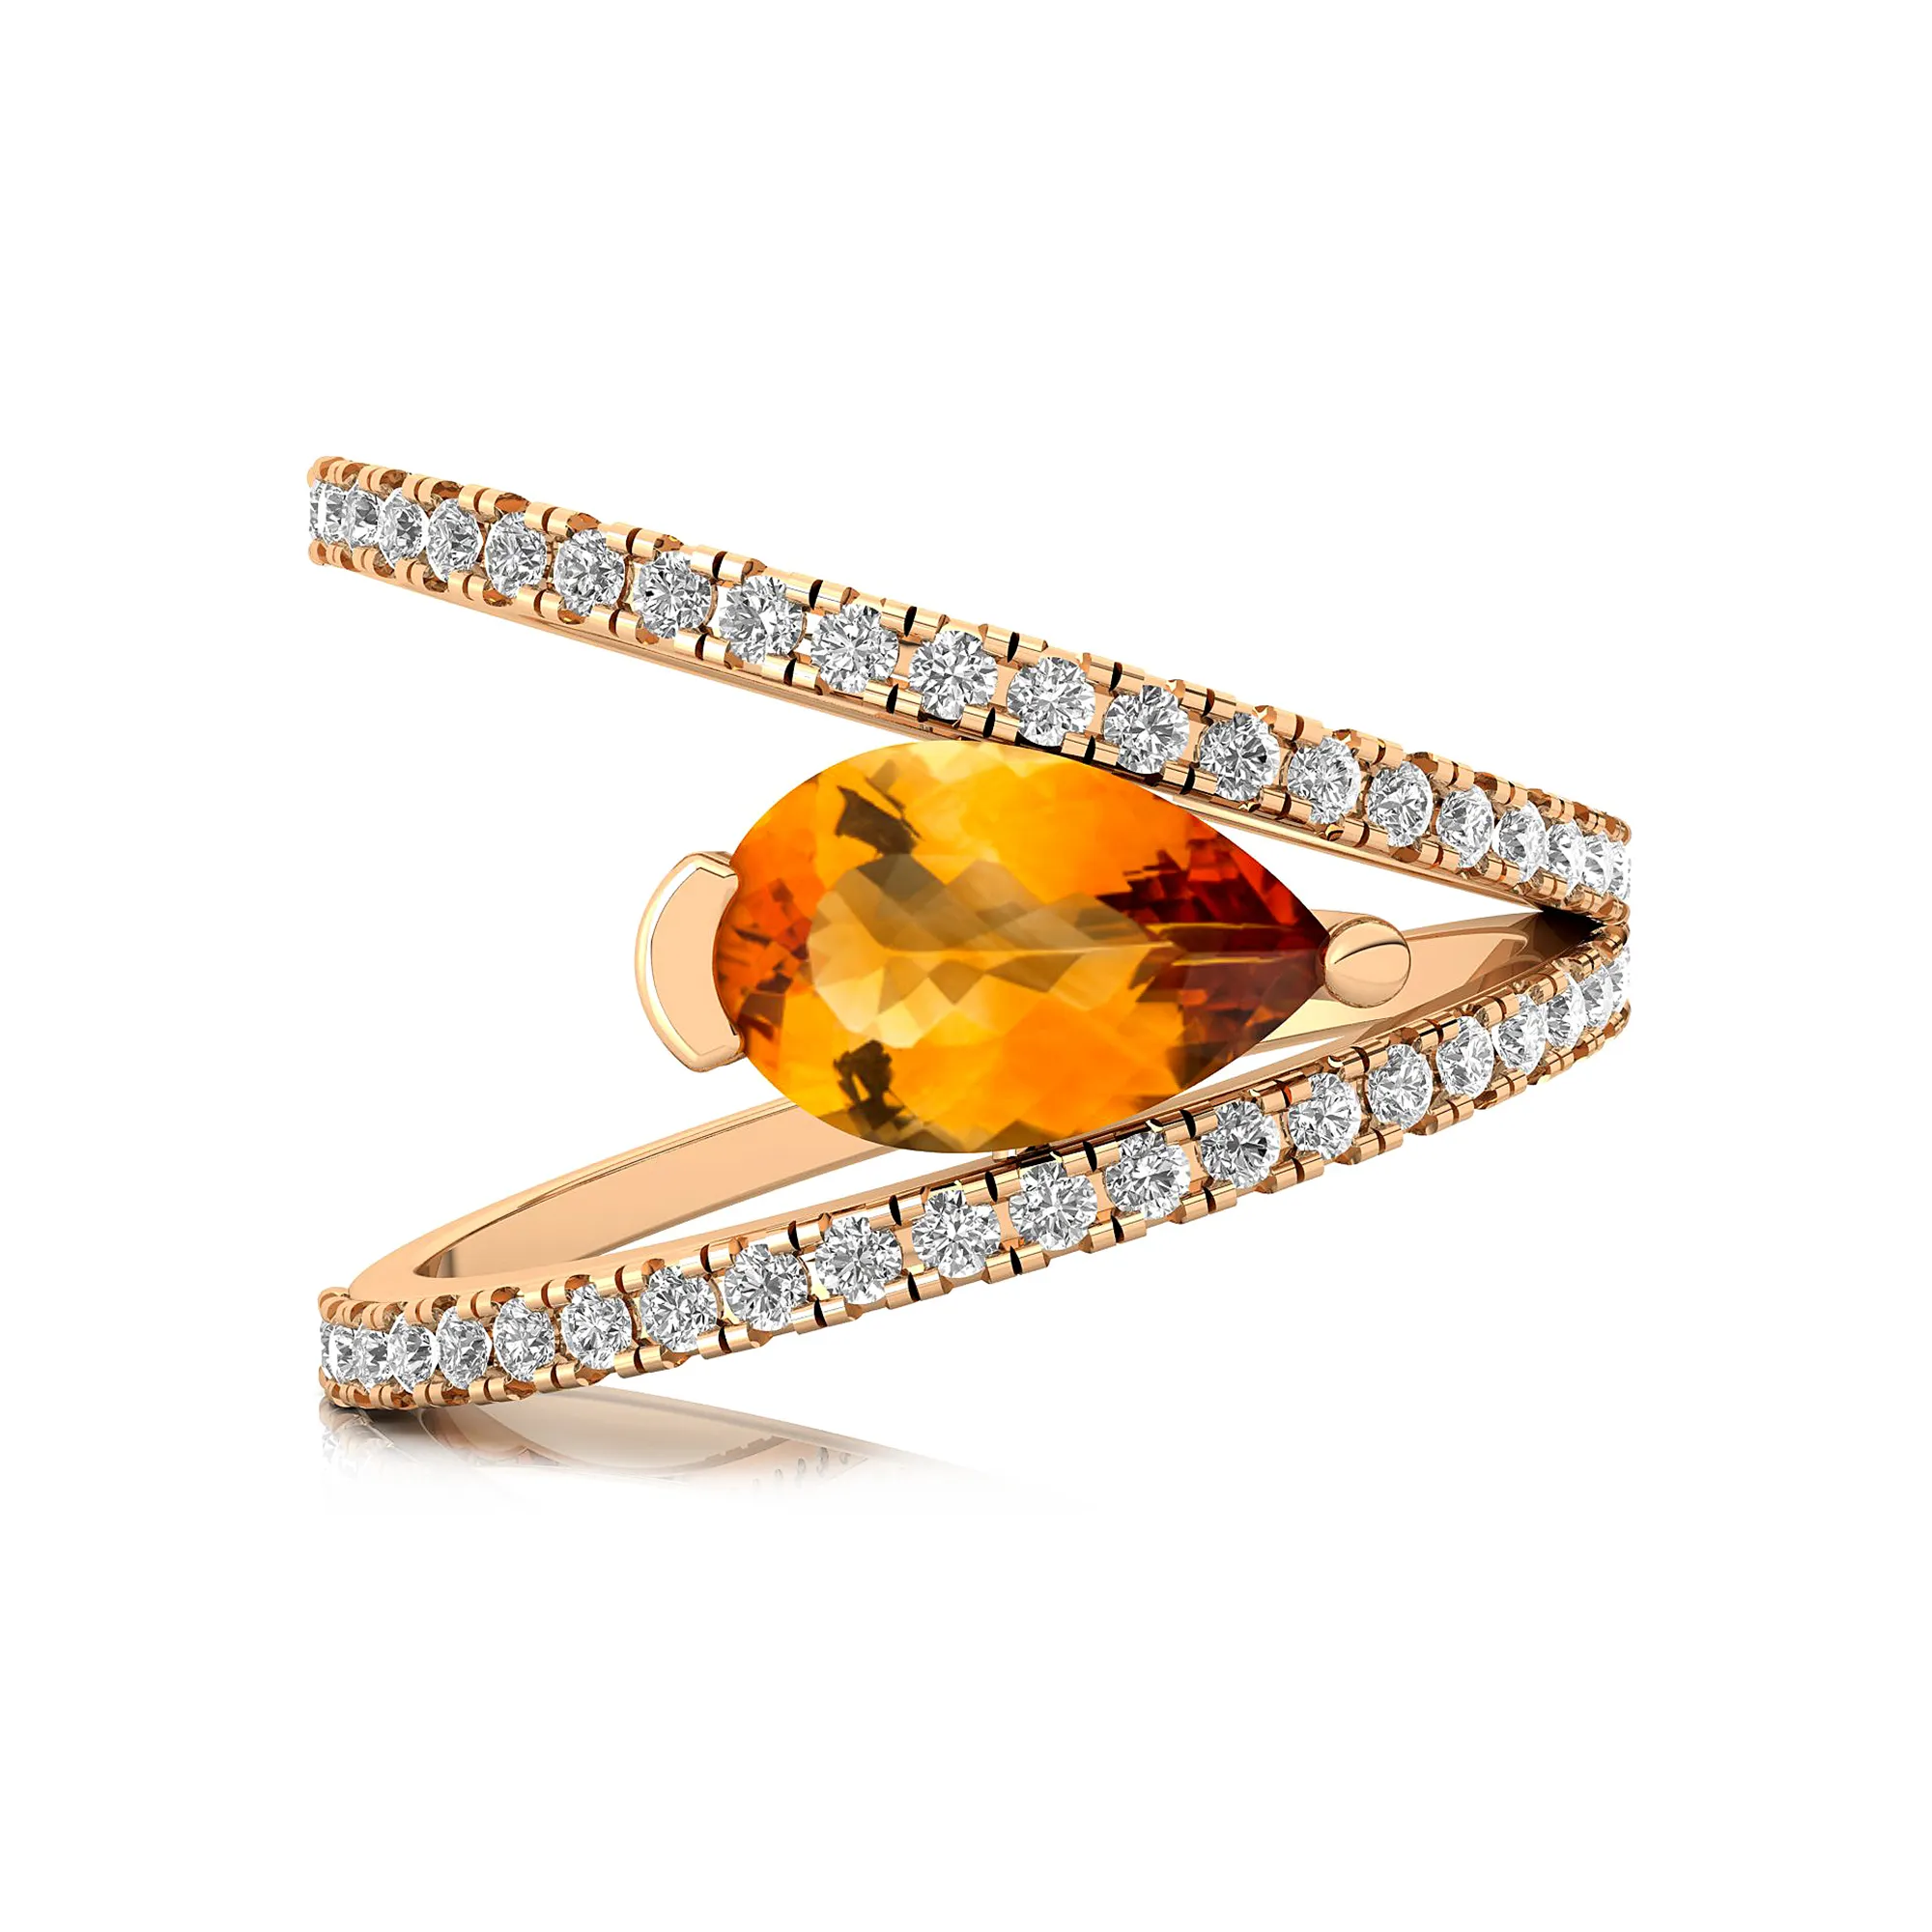 Best Selling Natural Pear Cut Citrine Gemstone & Diamond Spiral Rings in 18K Solid Yellow Rose White Gold Fine Jewelry For Women